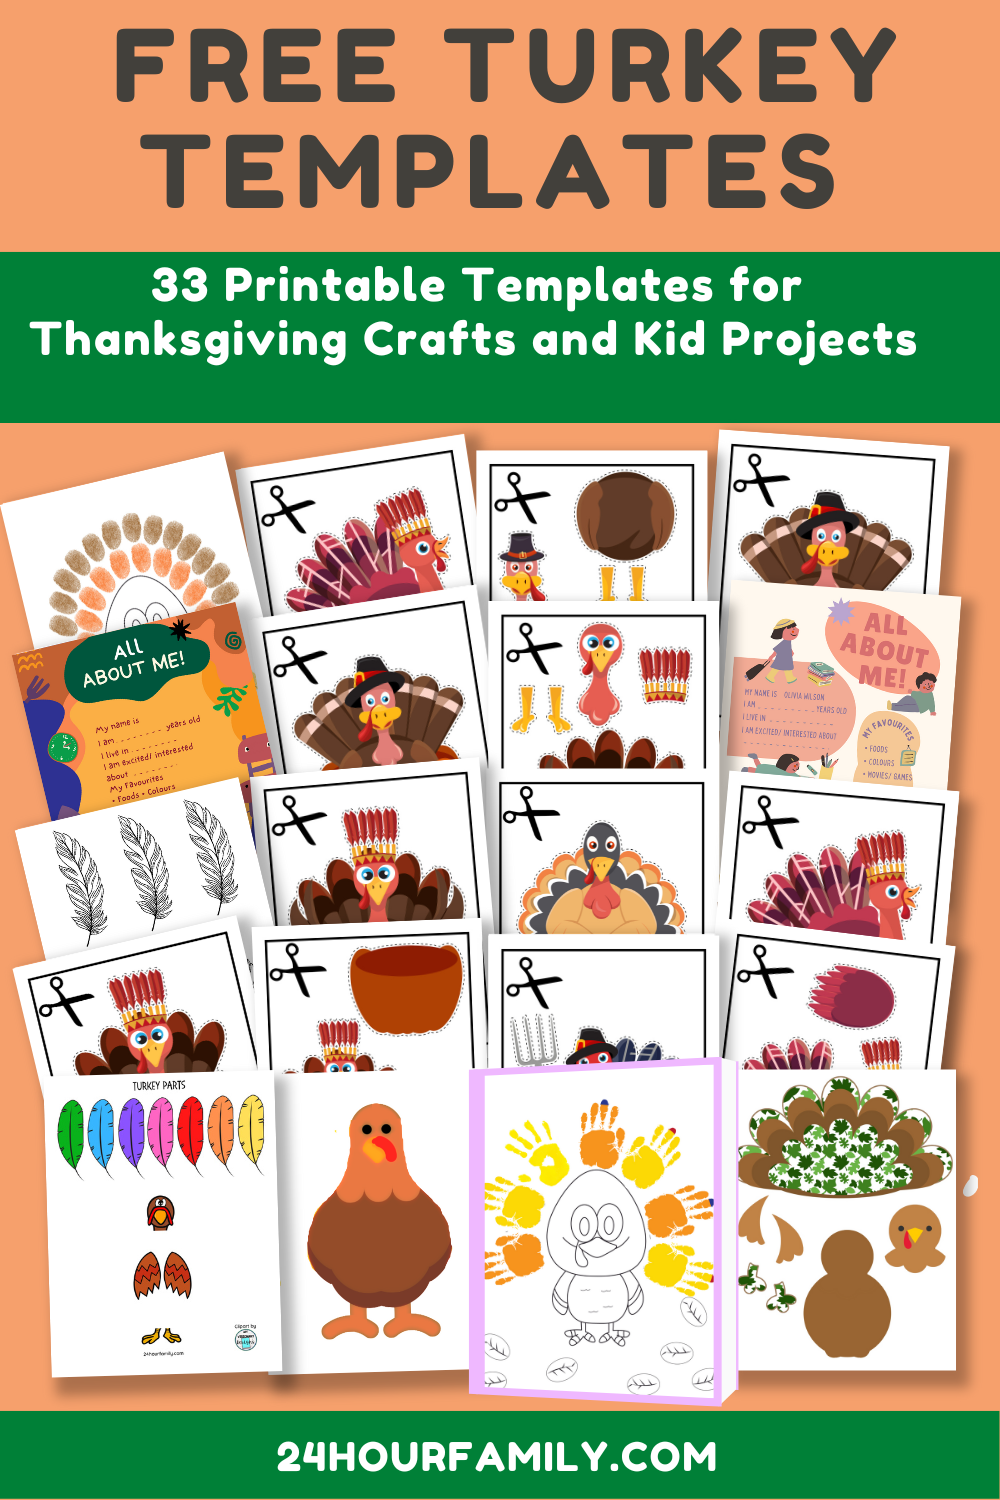 33 Printable Turkey Template Options for Crafts